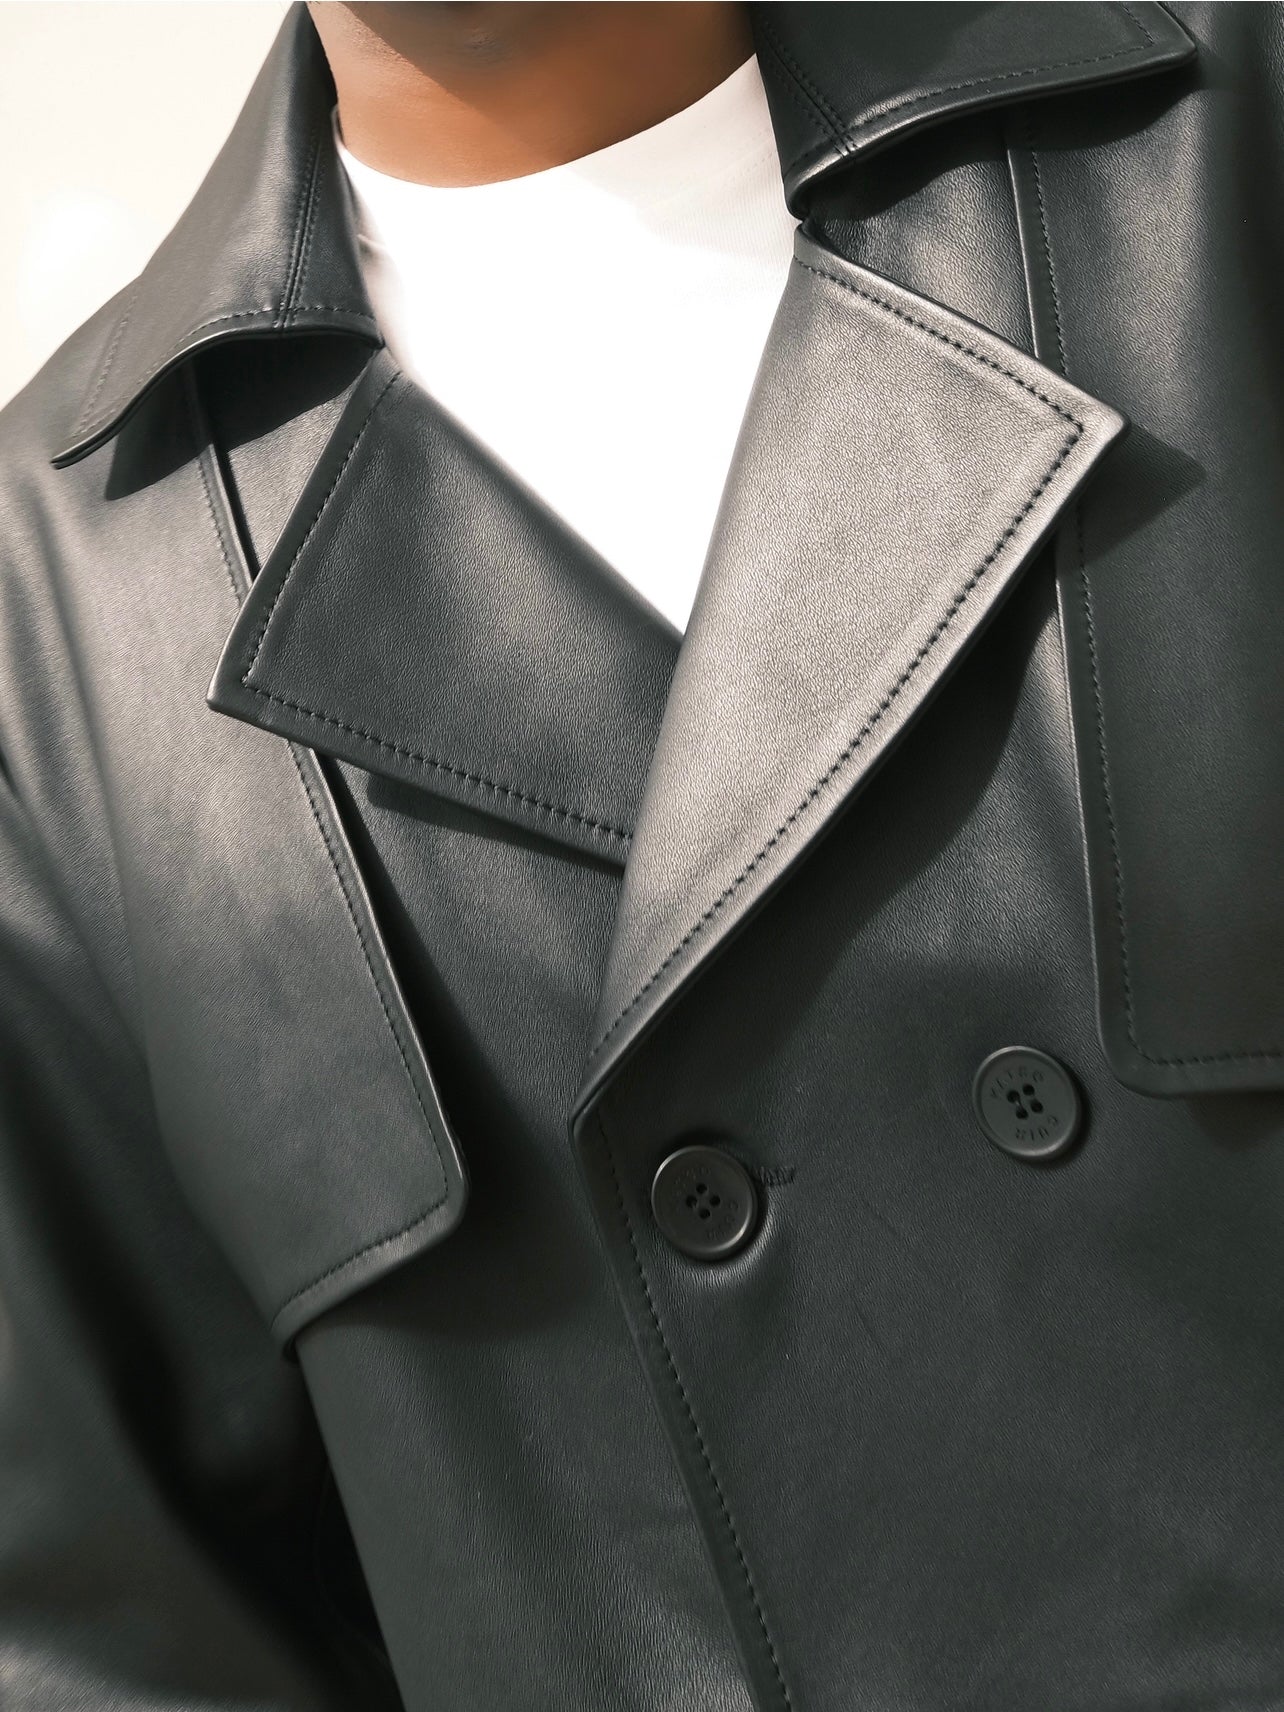 The leather trench coat for men